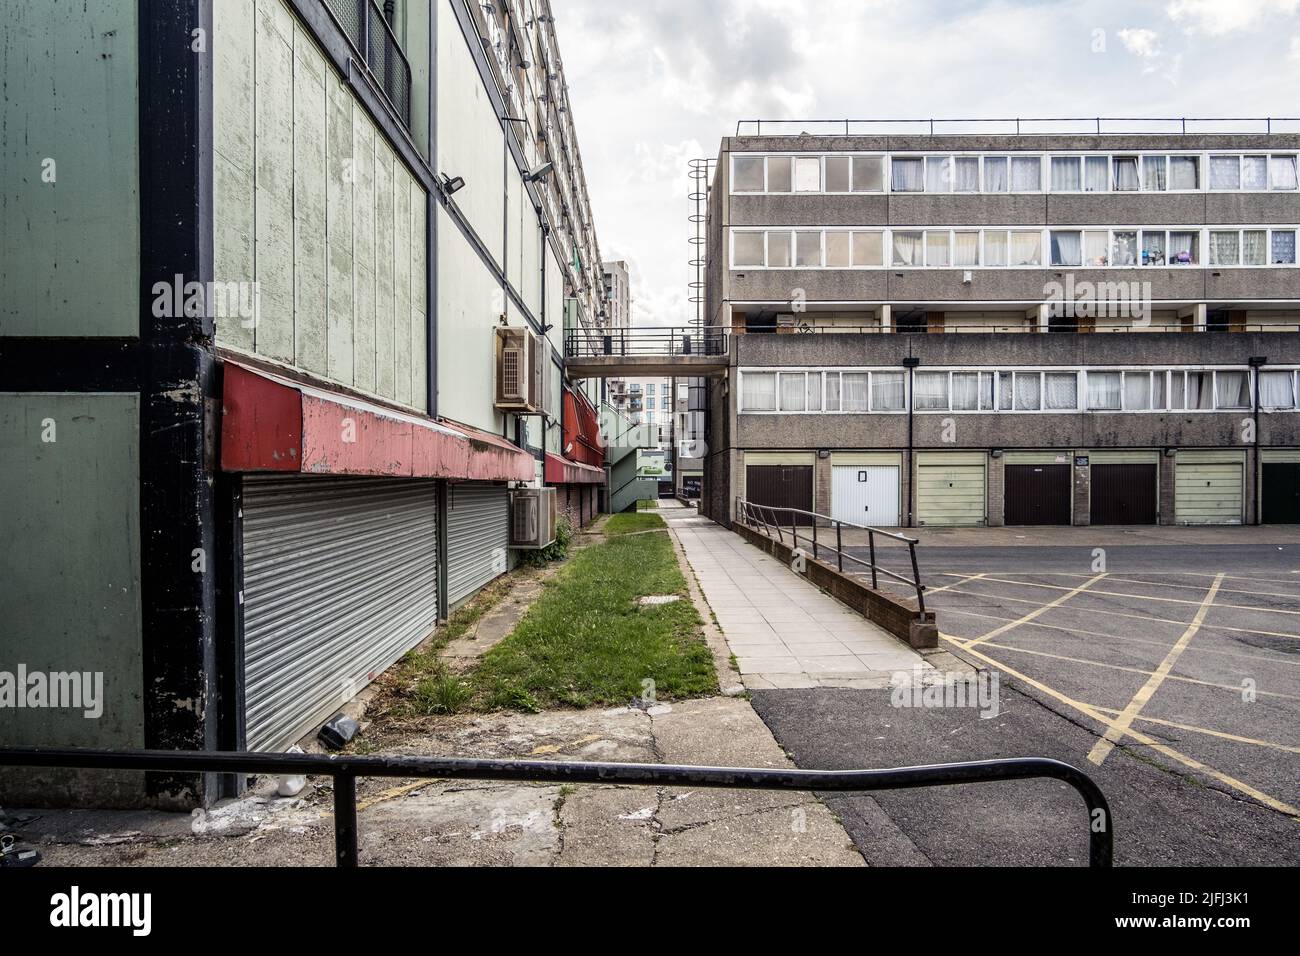 Council flats in the Aylesbury Housing Estate in Walworth, South London, England, UK. Stock Photo